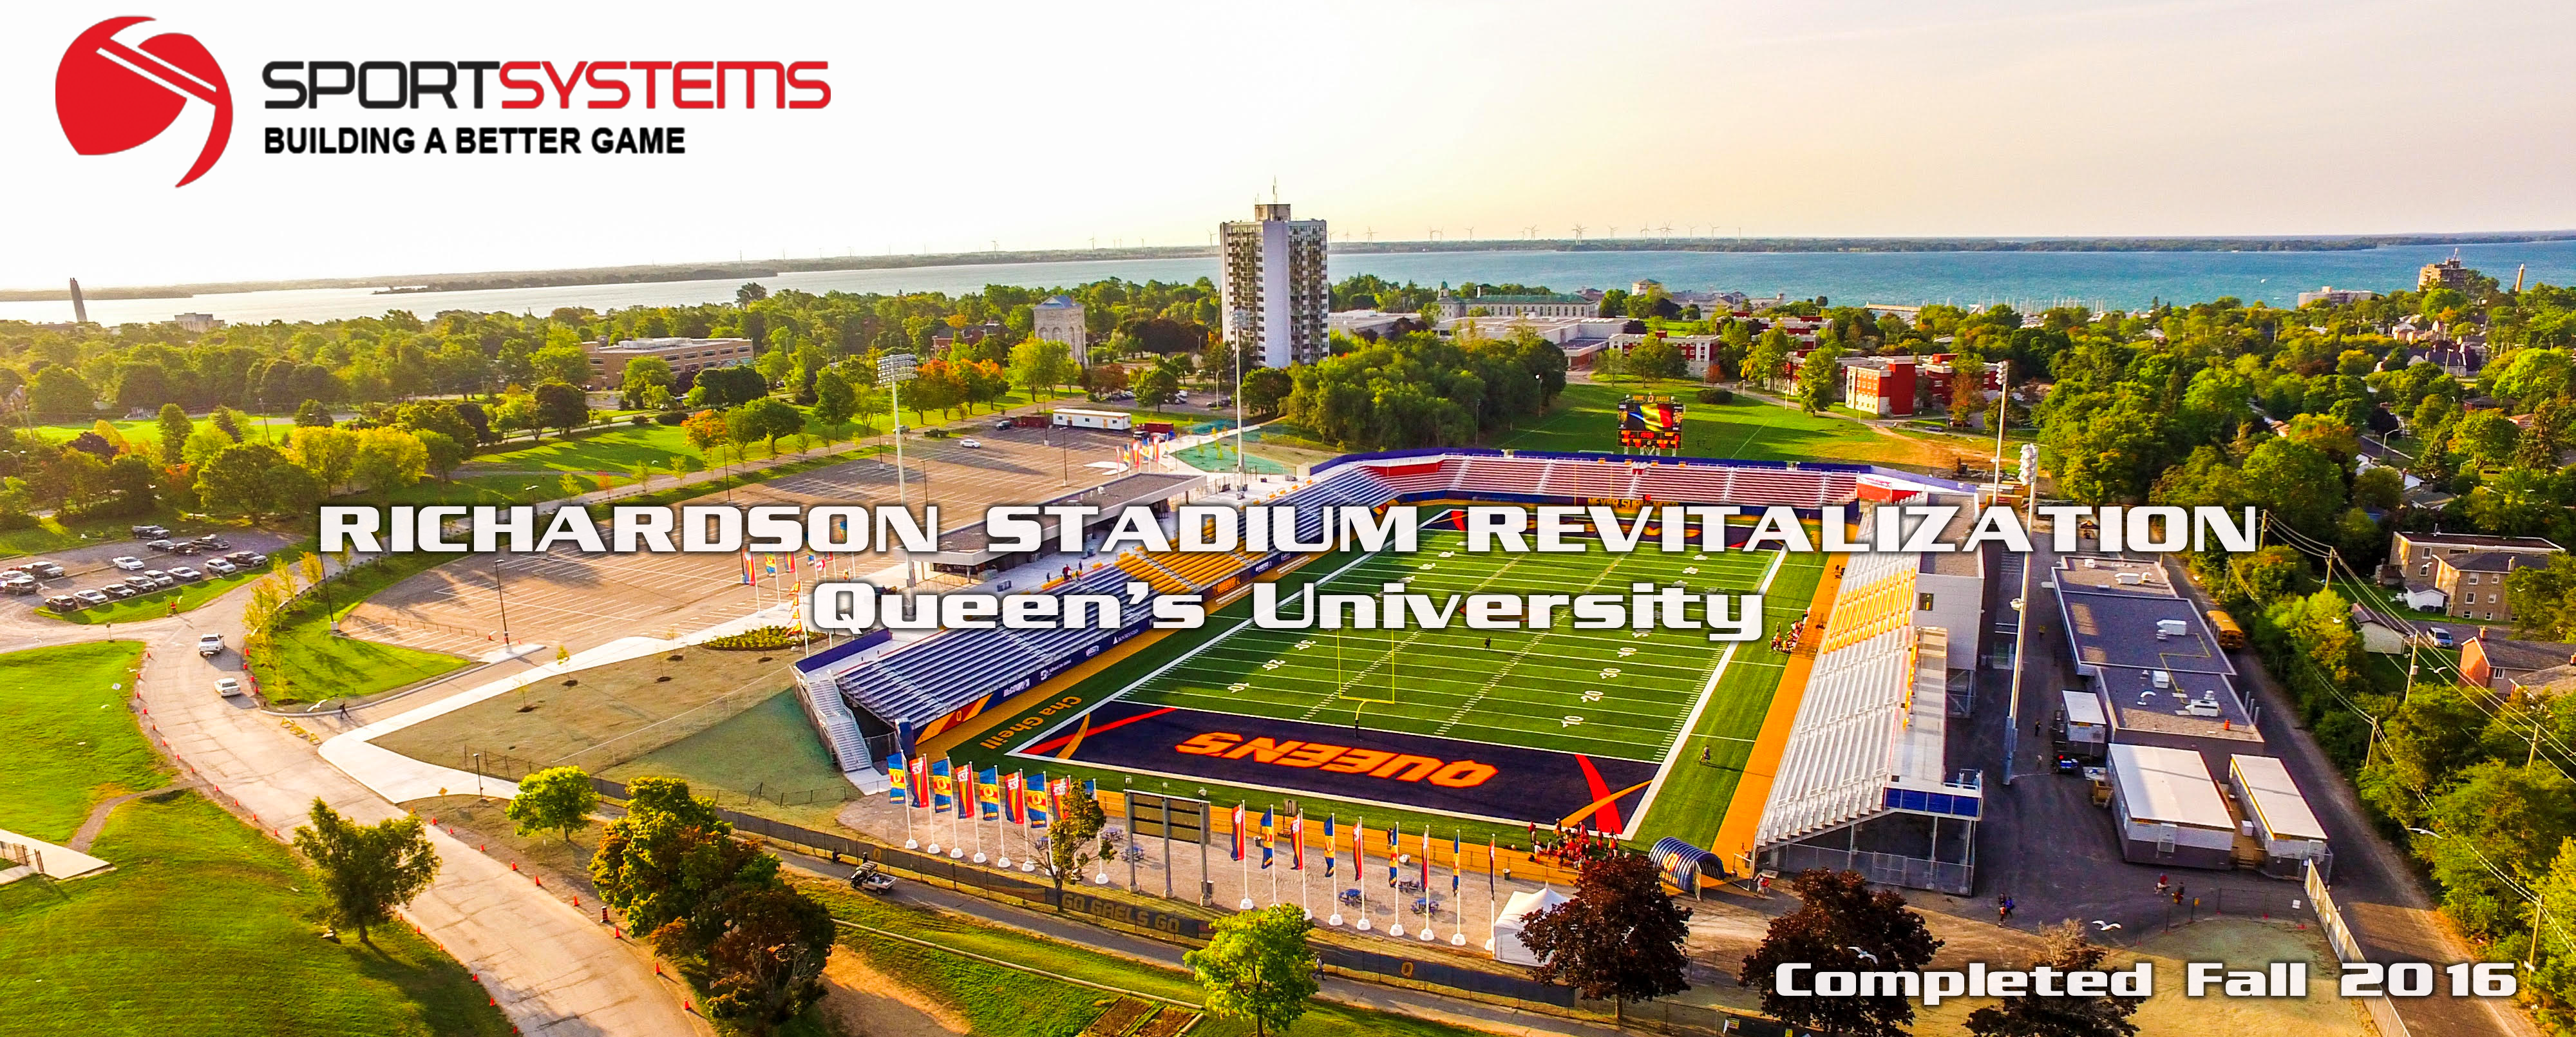 richardson-stadium-feature-page-header.png